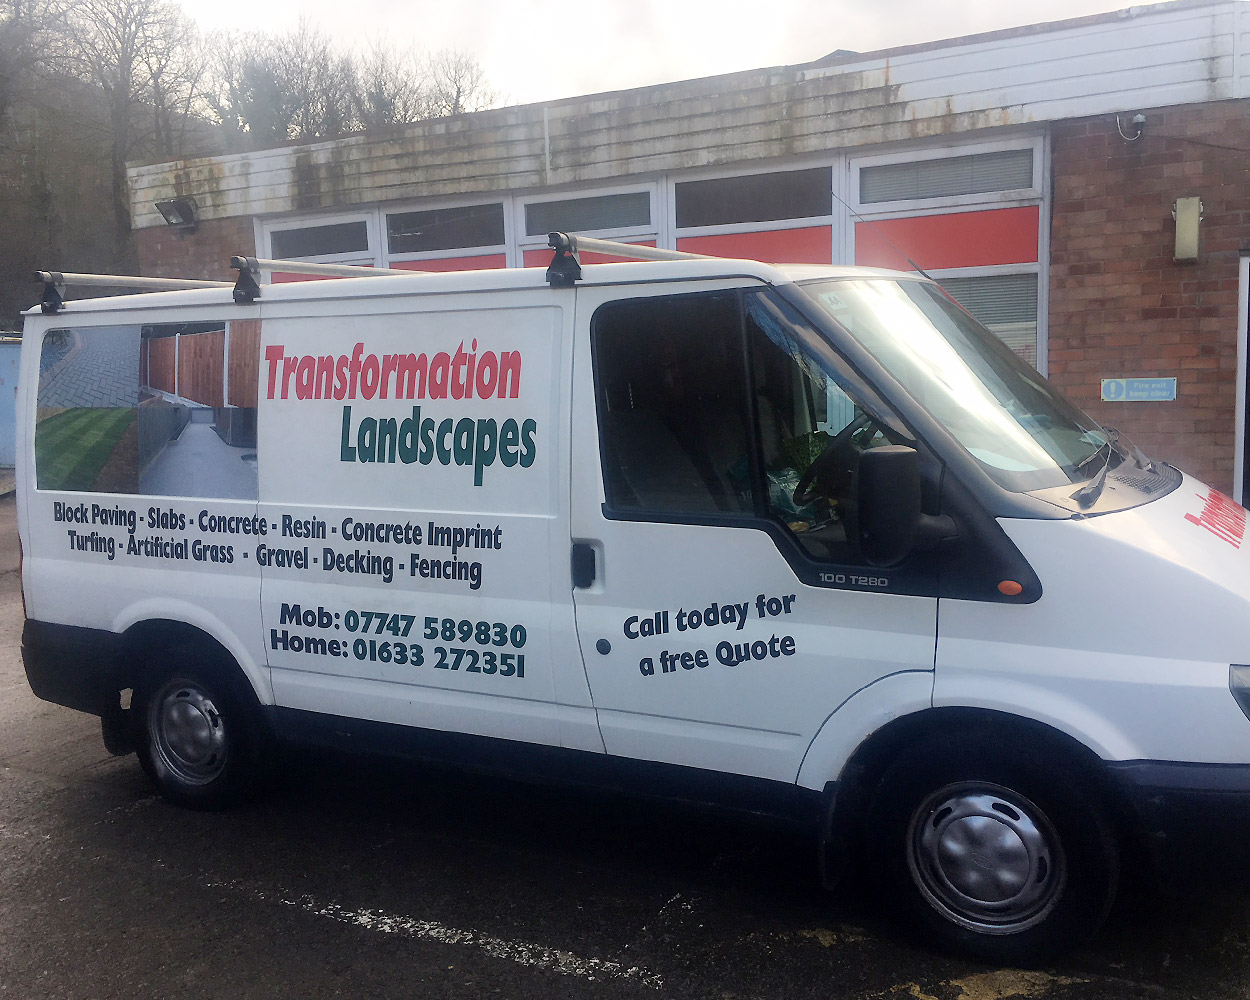 Transformation Landscapes Vehicle Livery